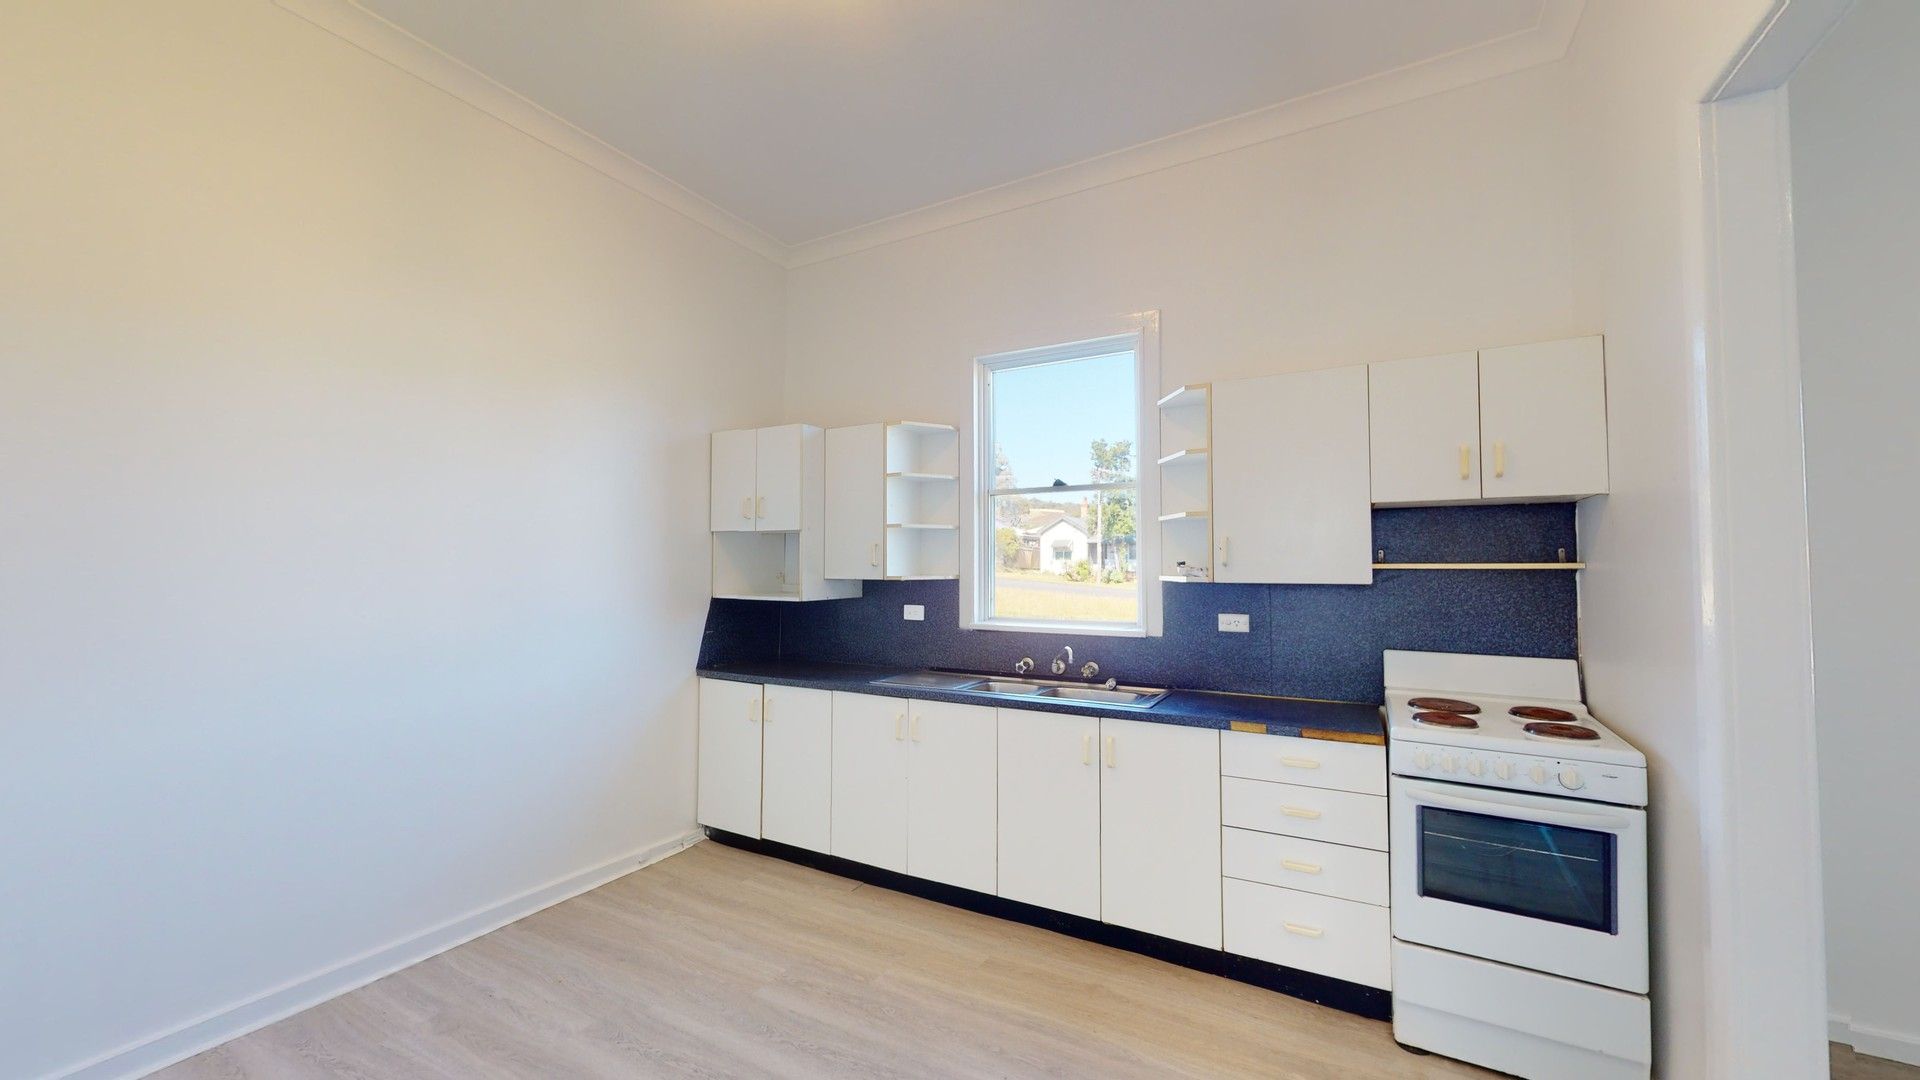 3 bedrooms House in 25 Nord Street SPEERS POINT NSW, 2284